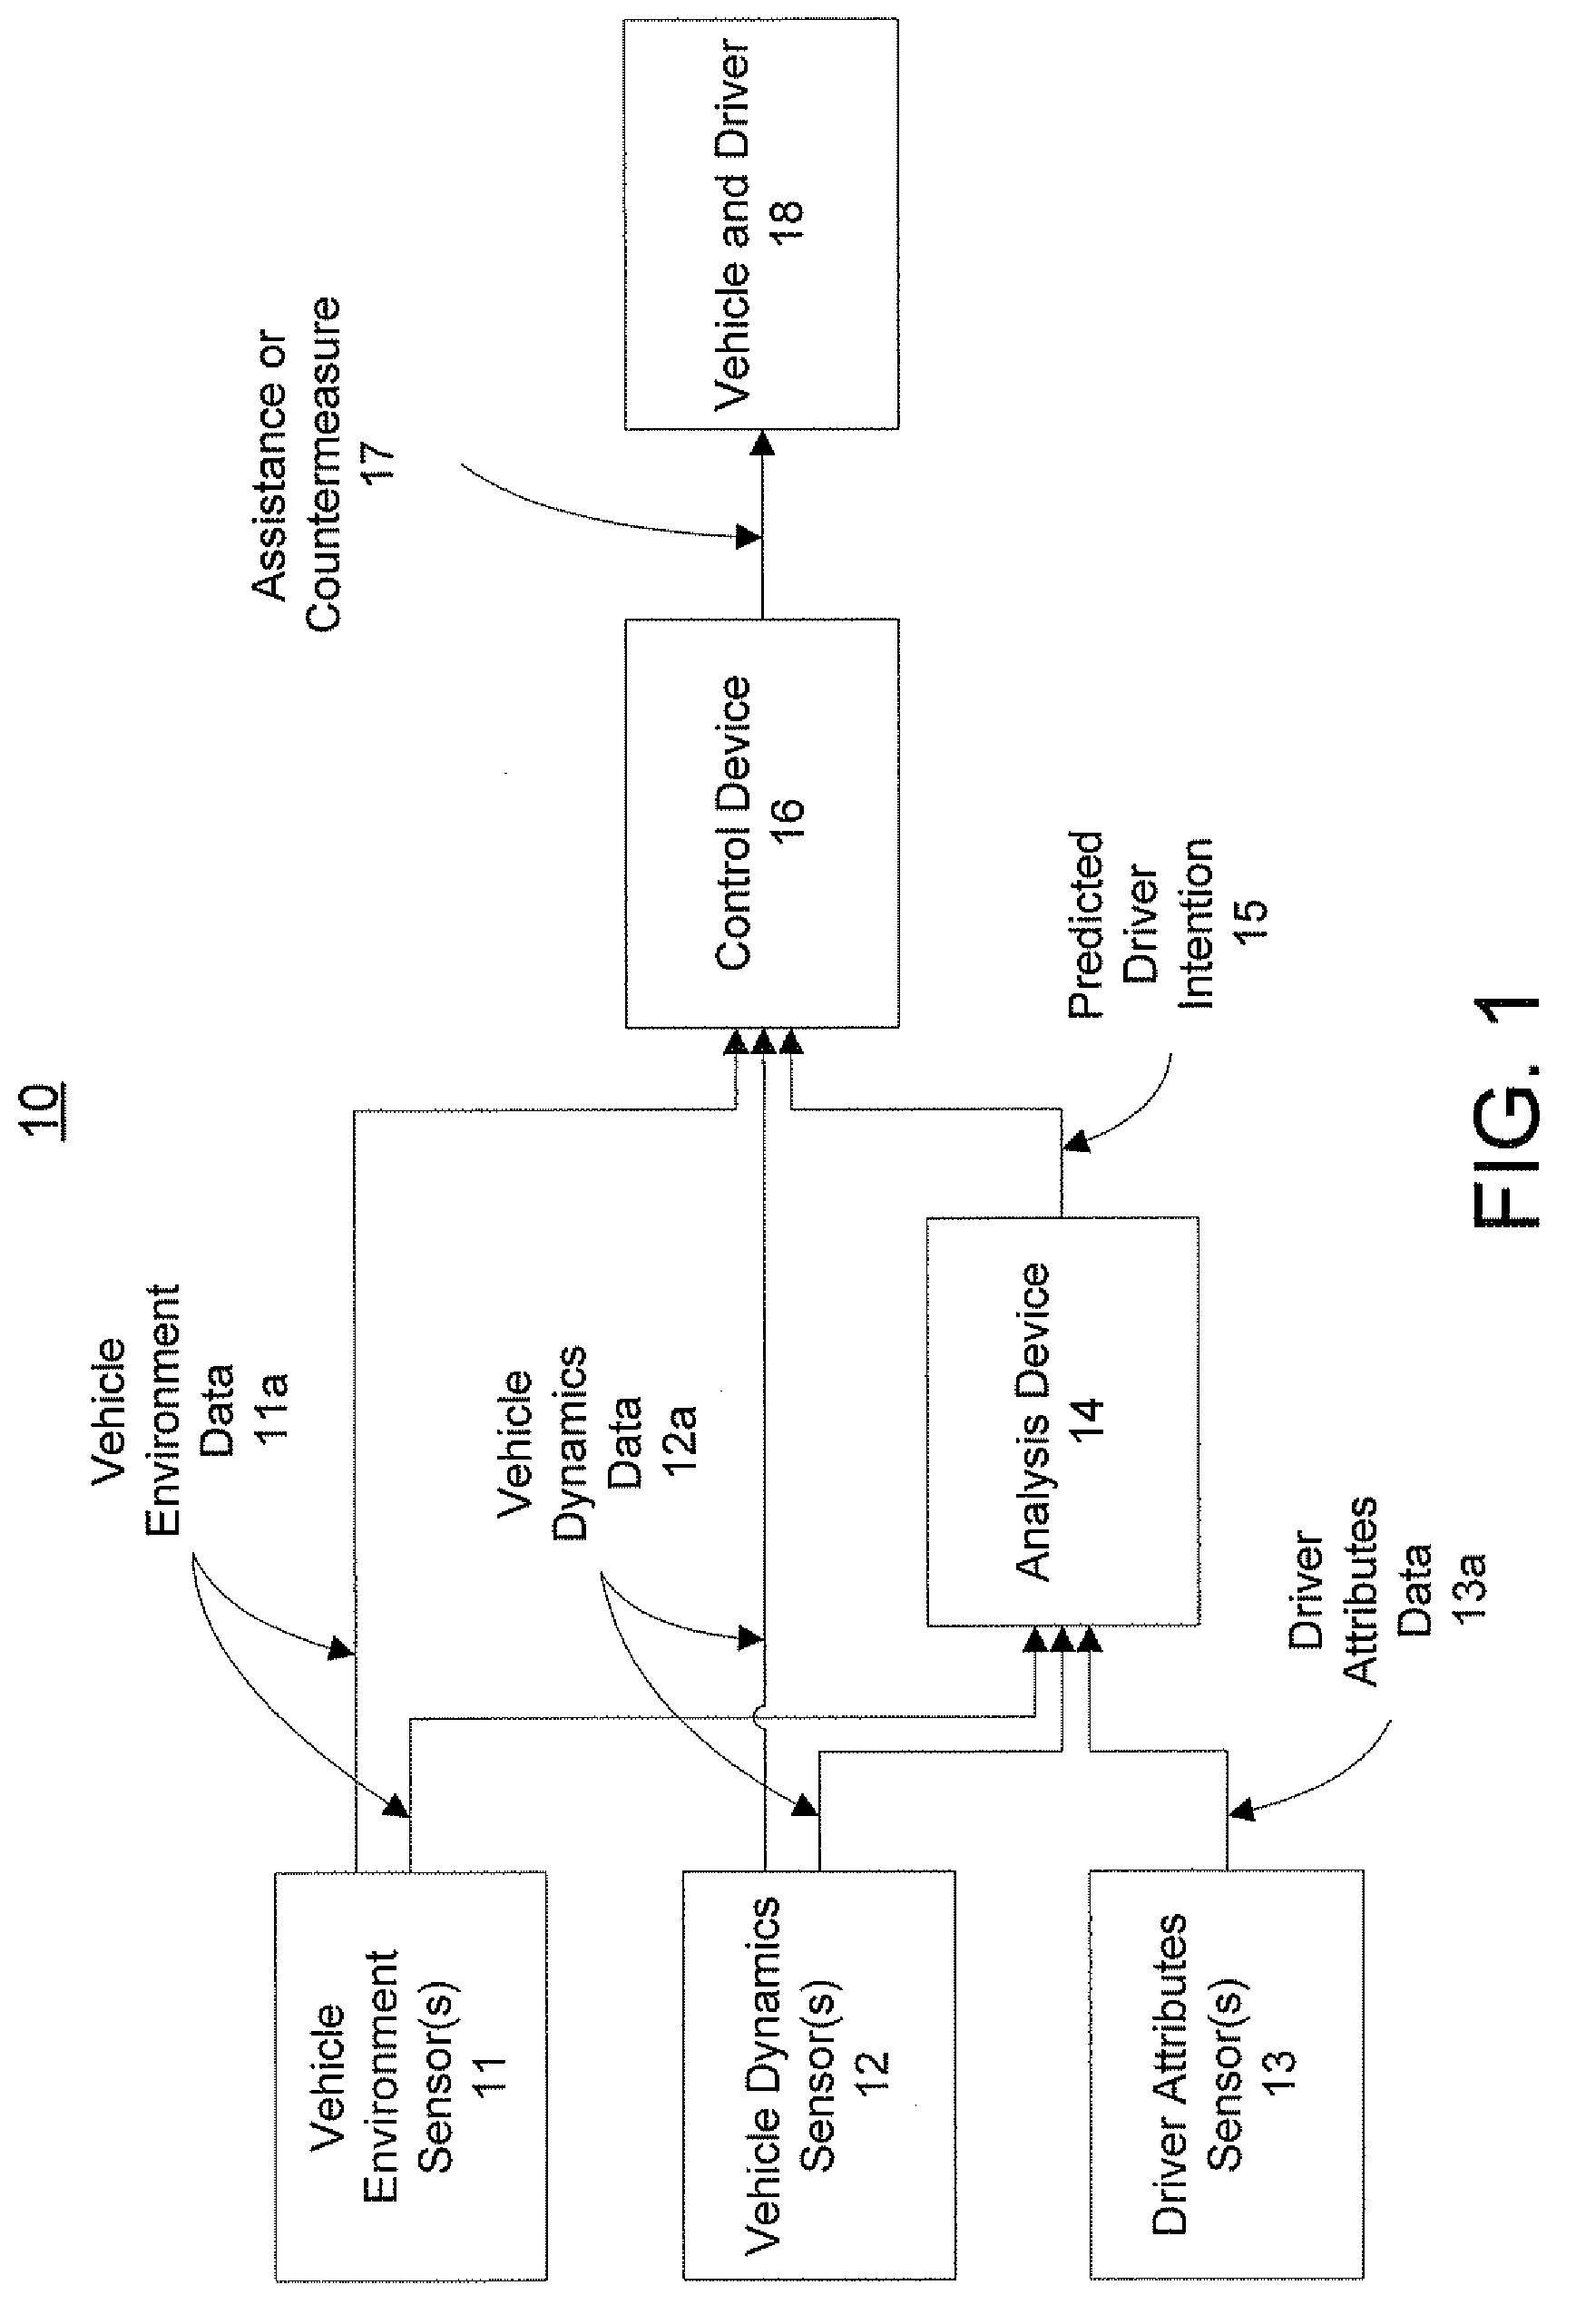 System and method for estimated driver intention for driver assistance system control